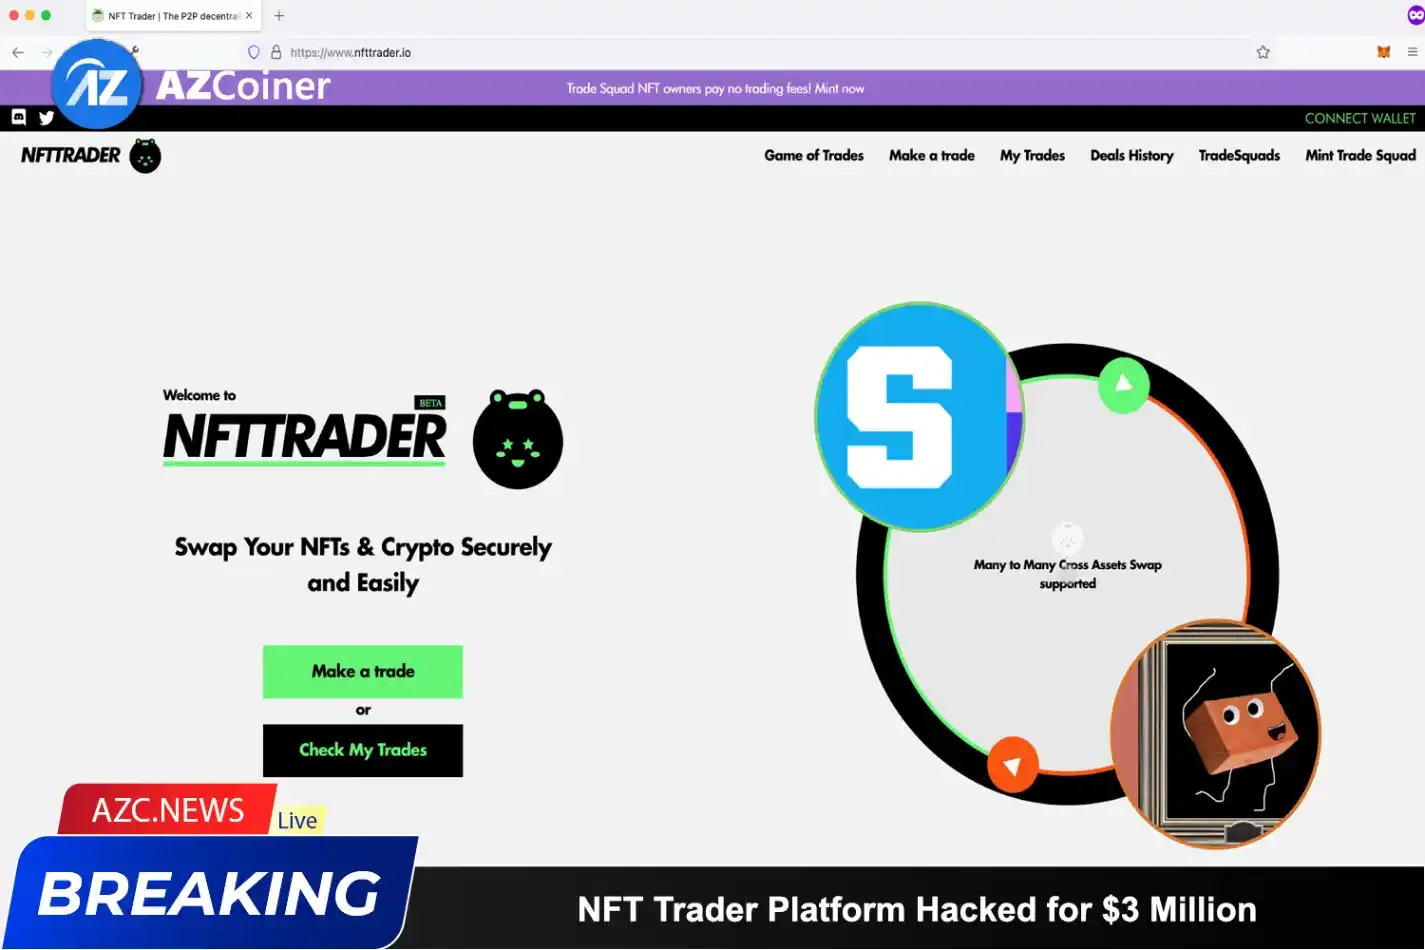 Nft Trader Platform Experiences Security Vulnerability, Hacked For $3 Million_65b97958a87a2.webp